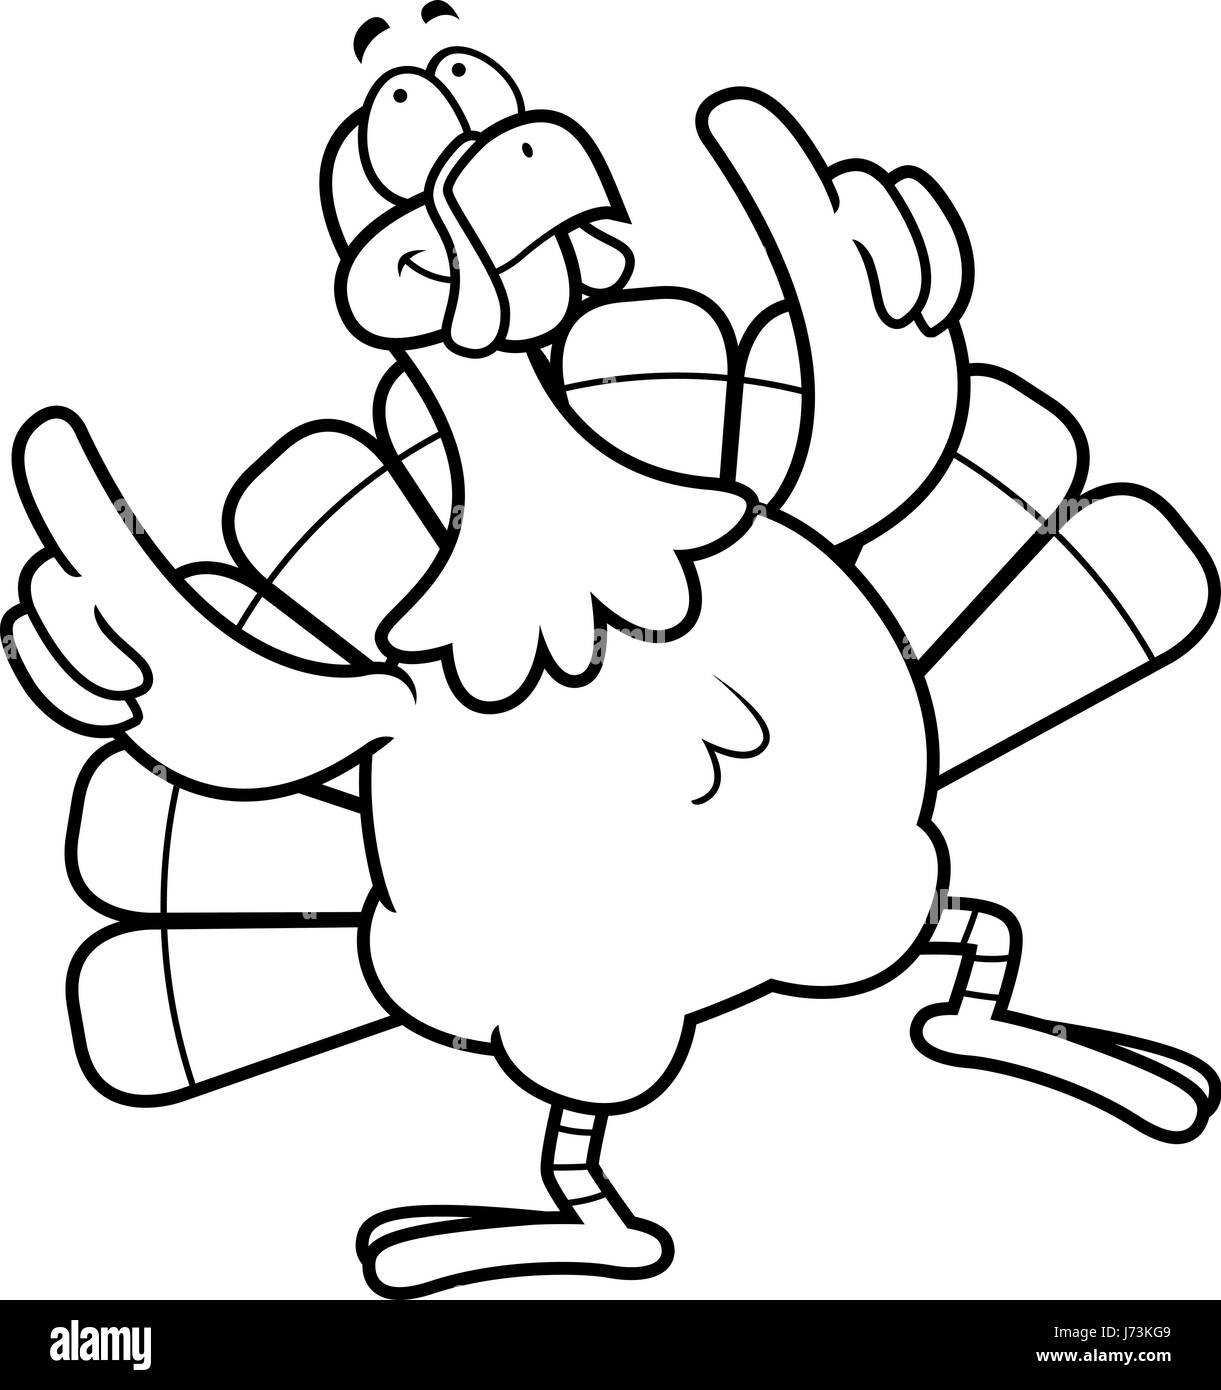 A happy cartoon turkey dancing and smiling. Stock Vector